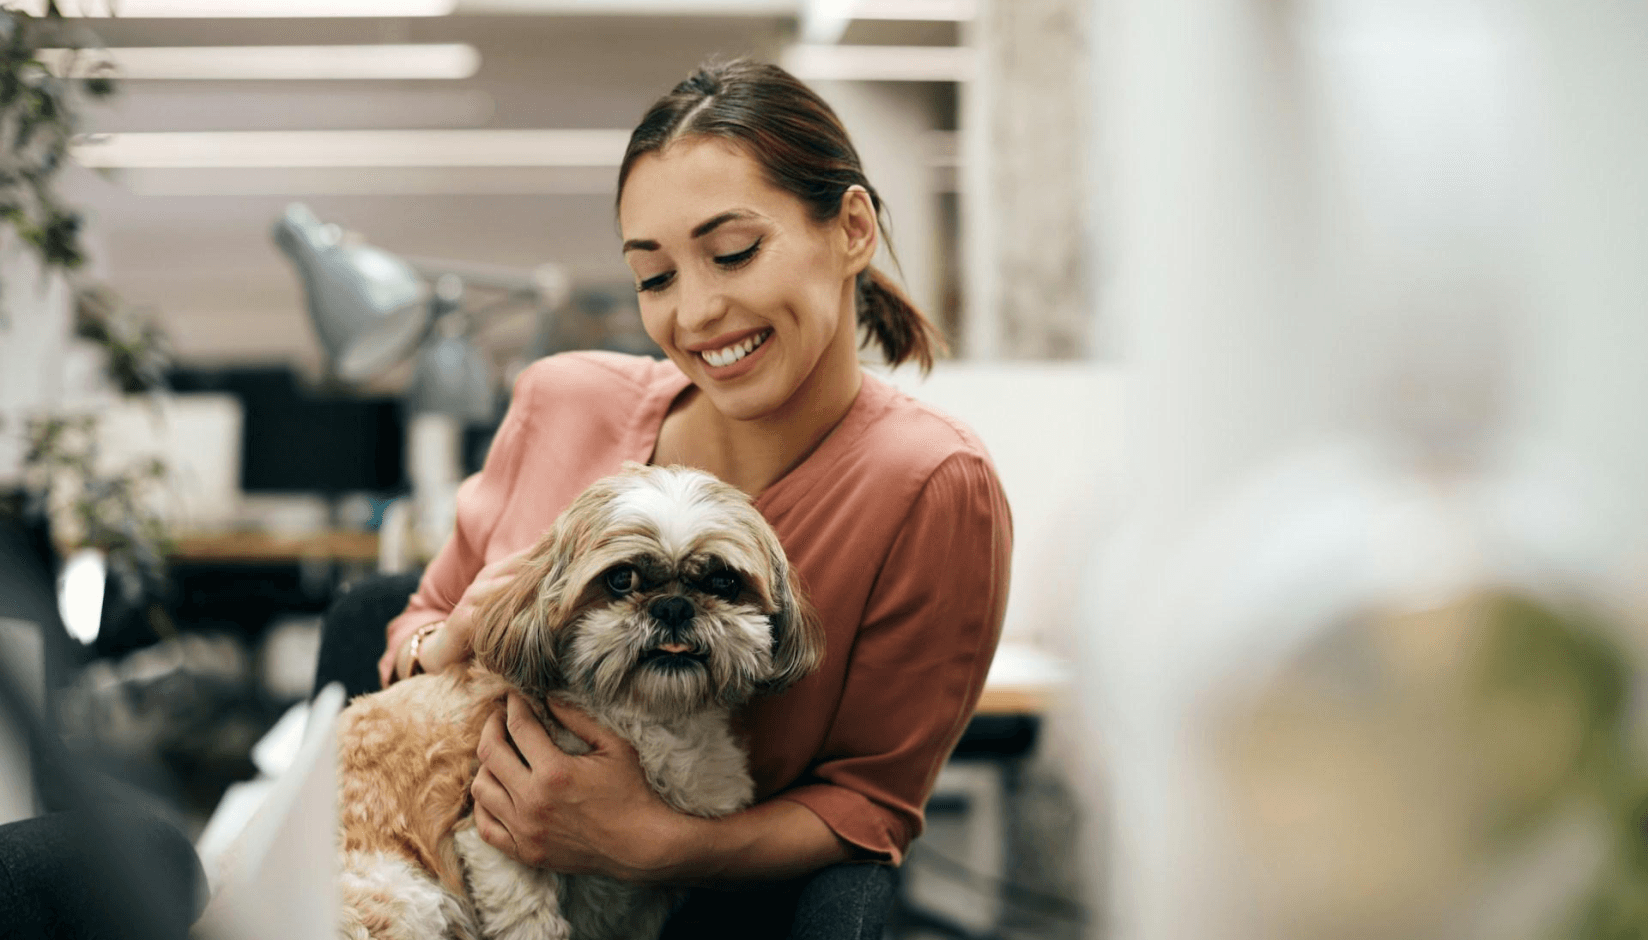 Coworking space member with a dog